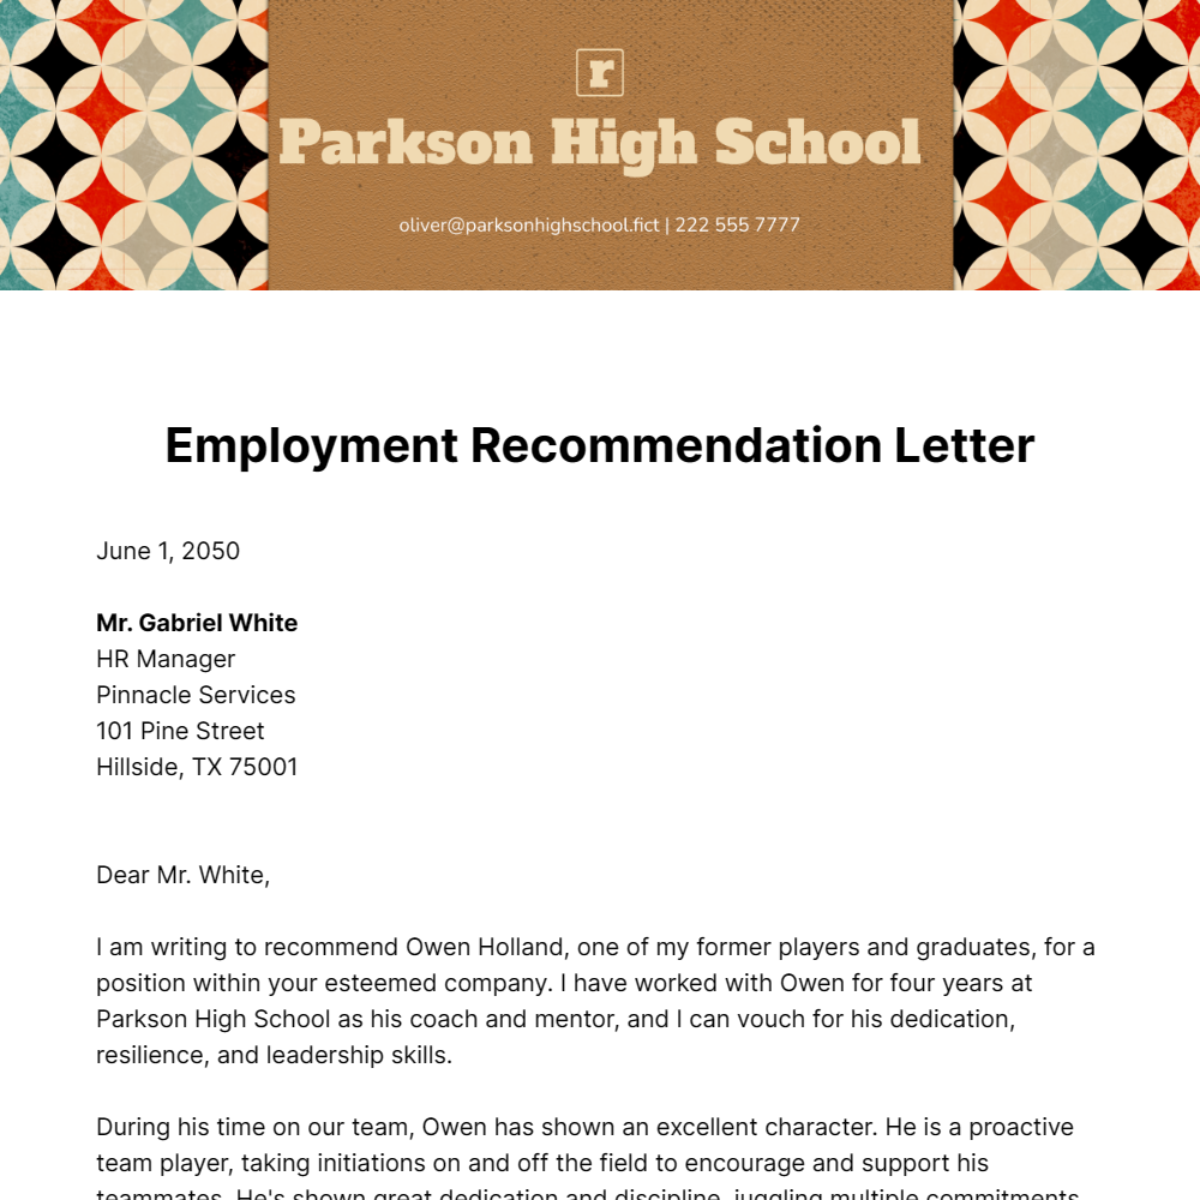 Employment Recommendation Letter   Template